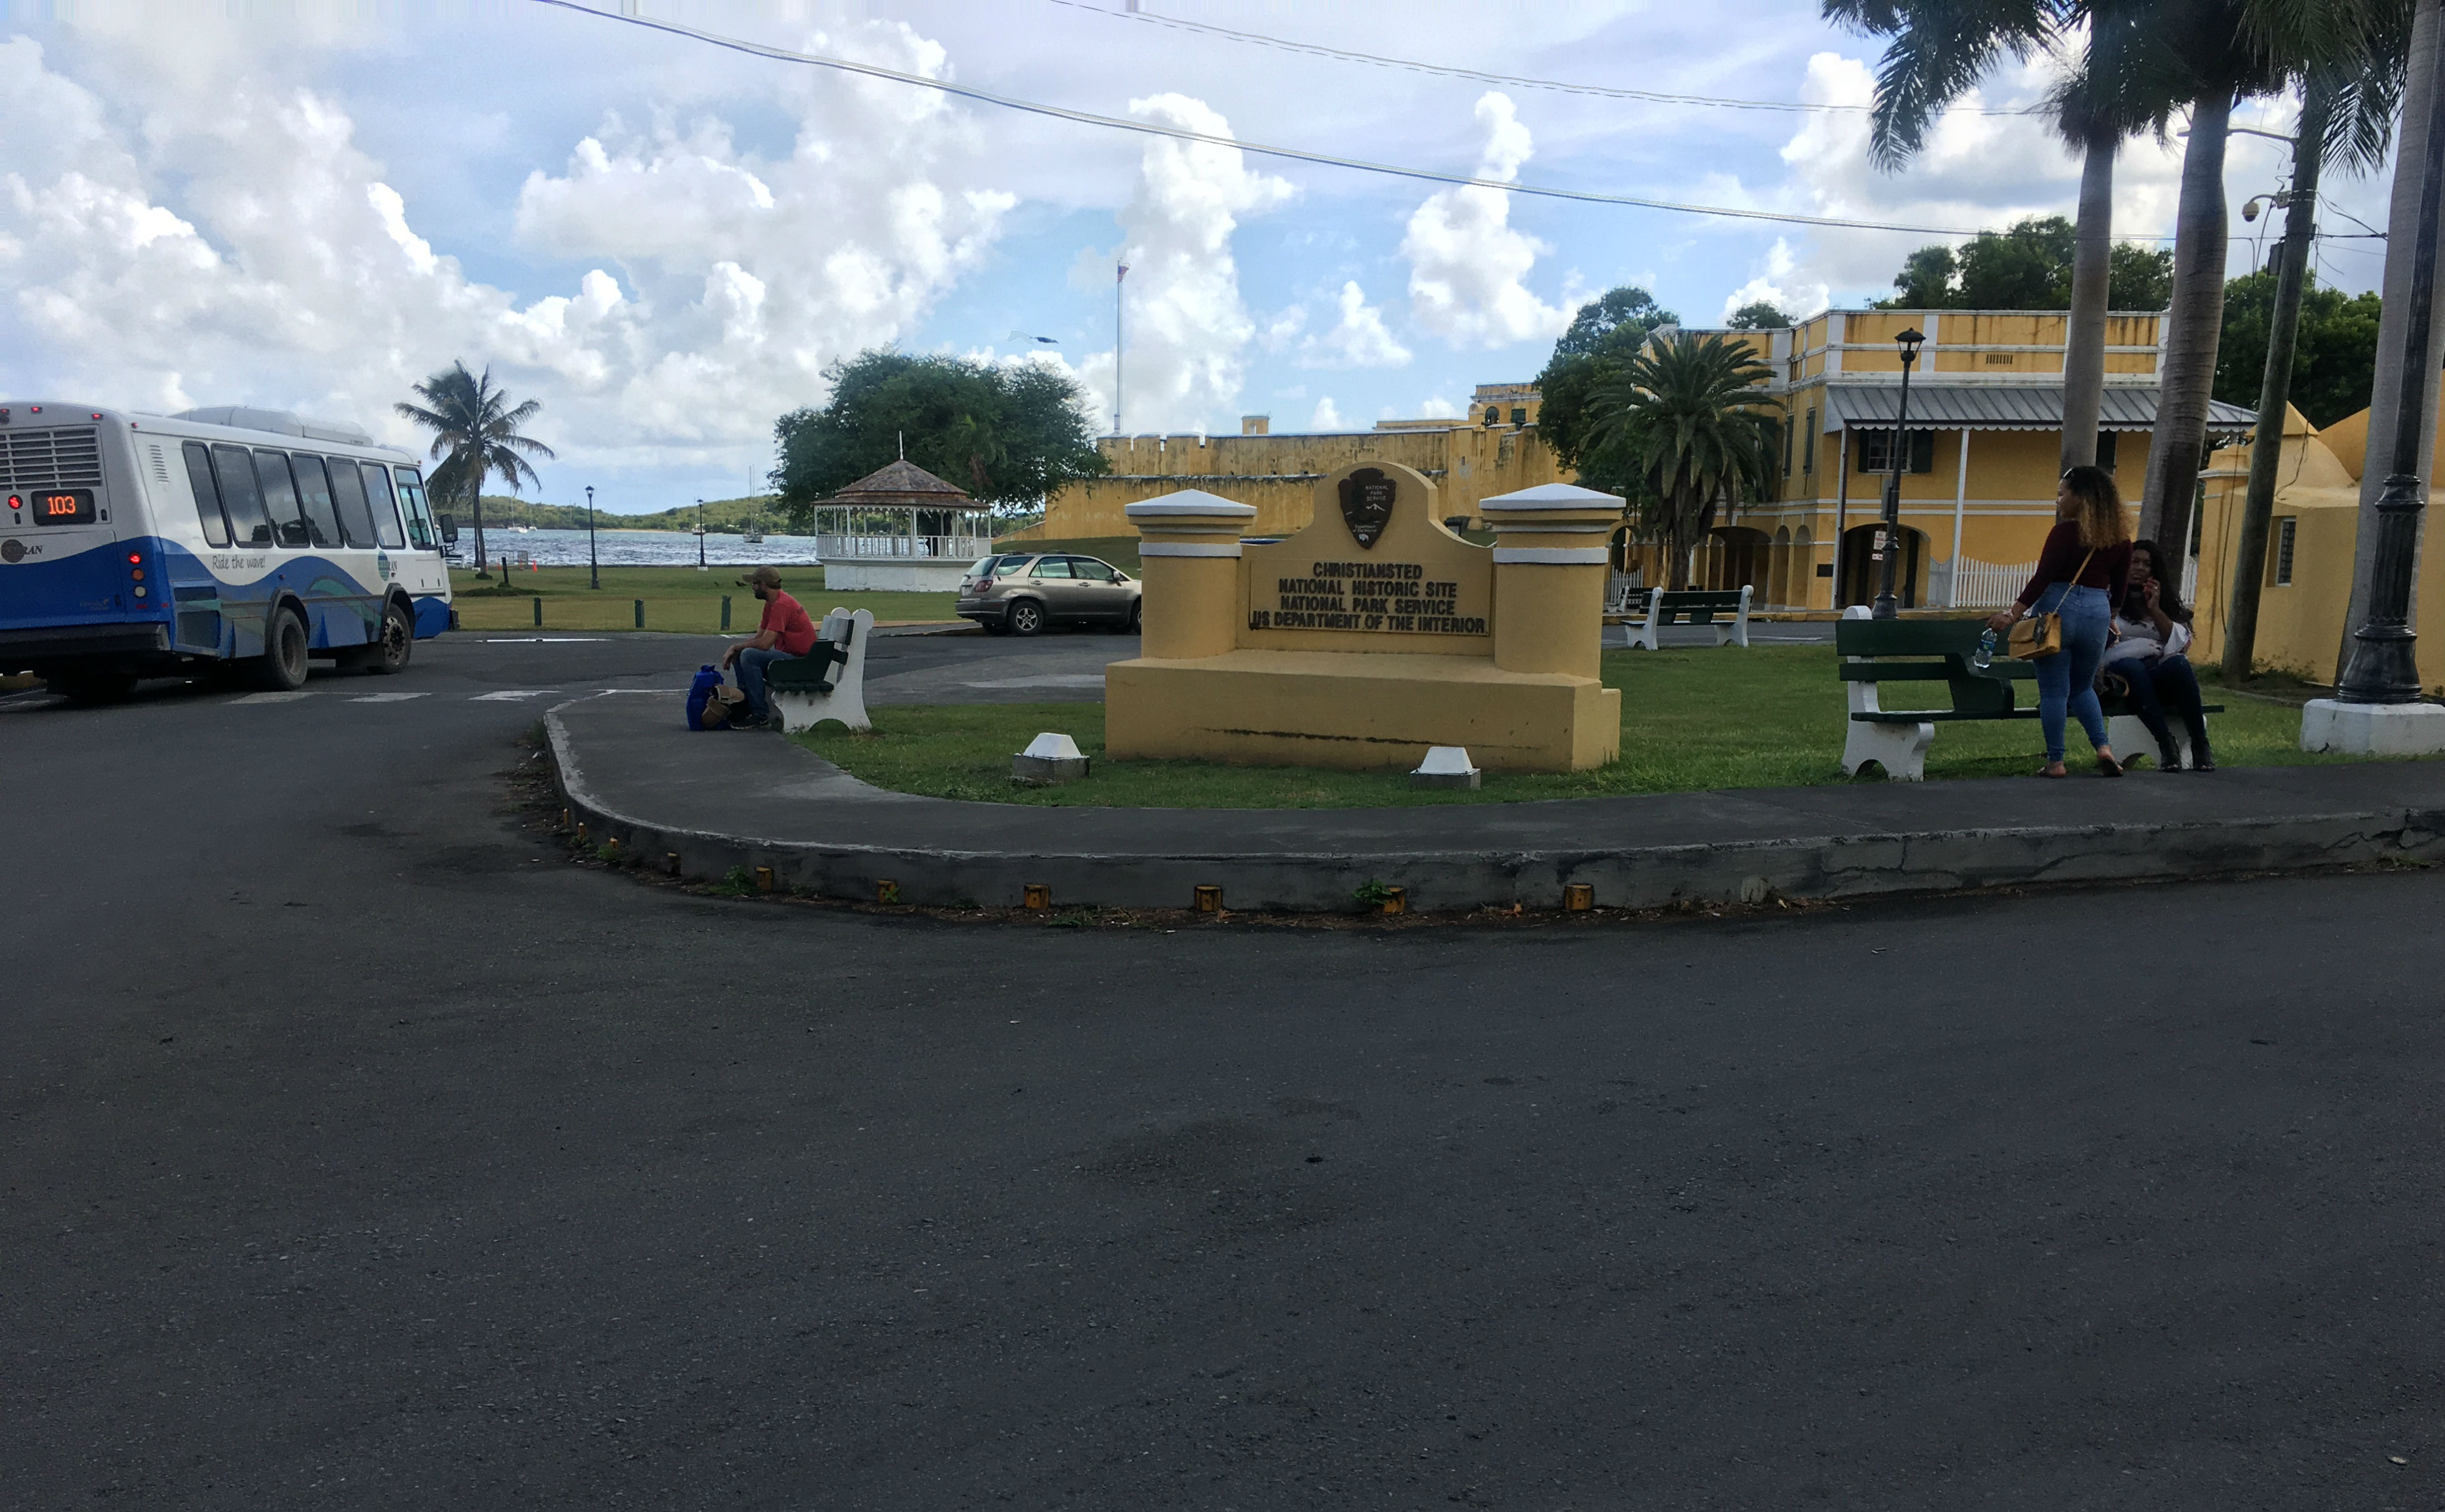 Christiansted National Historic Site, National Park Service, U.S. Department of the Interior